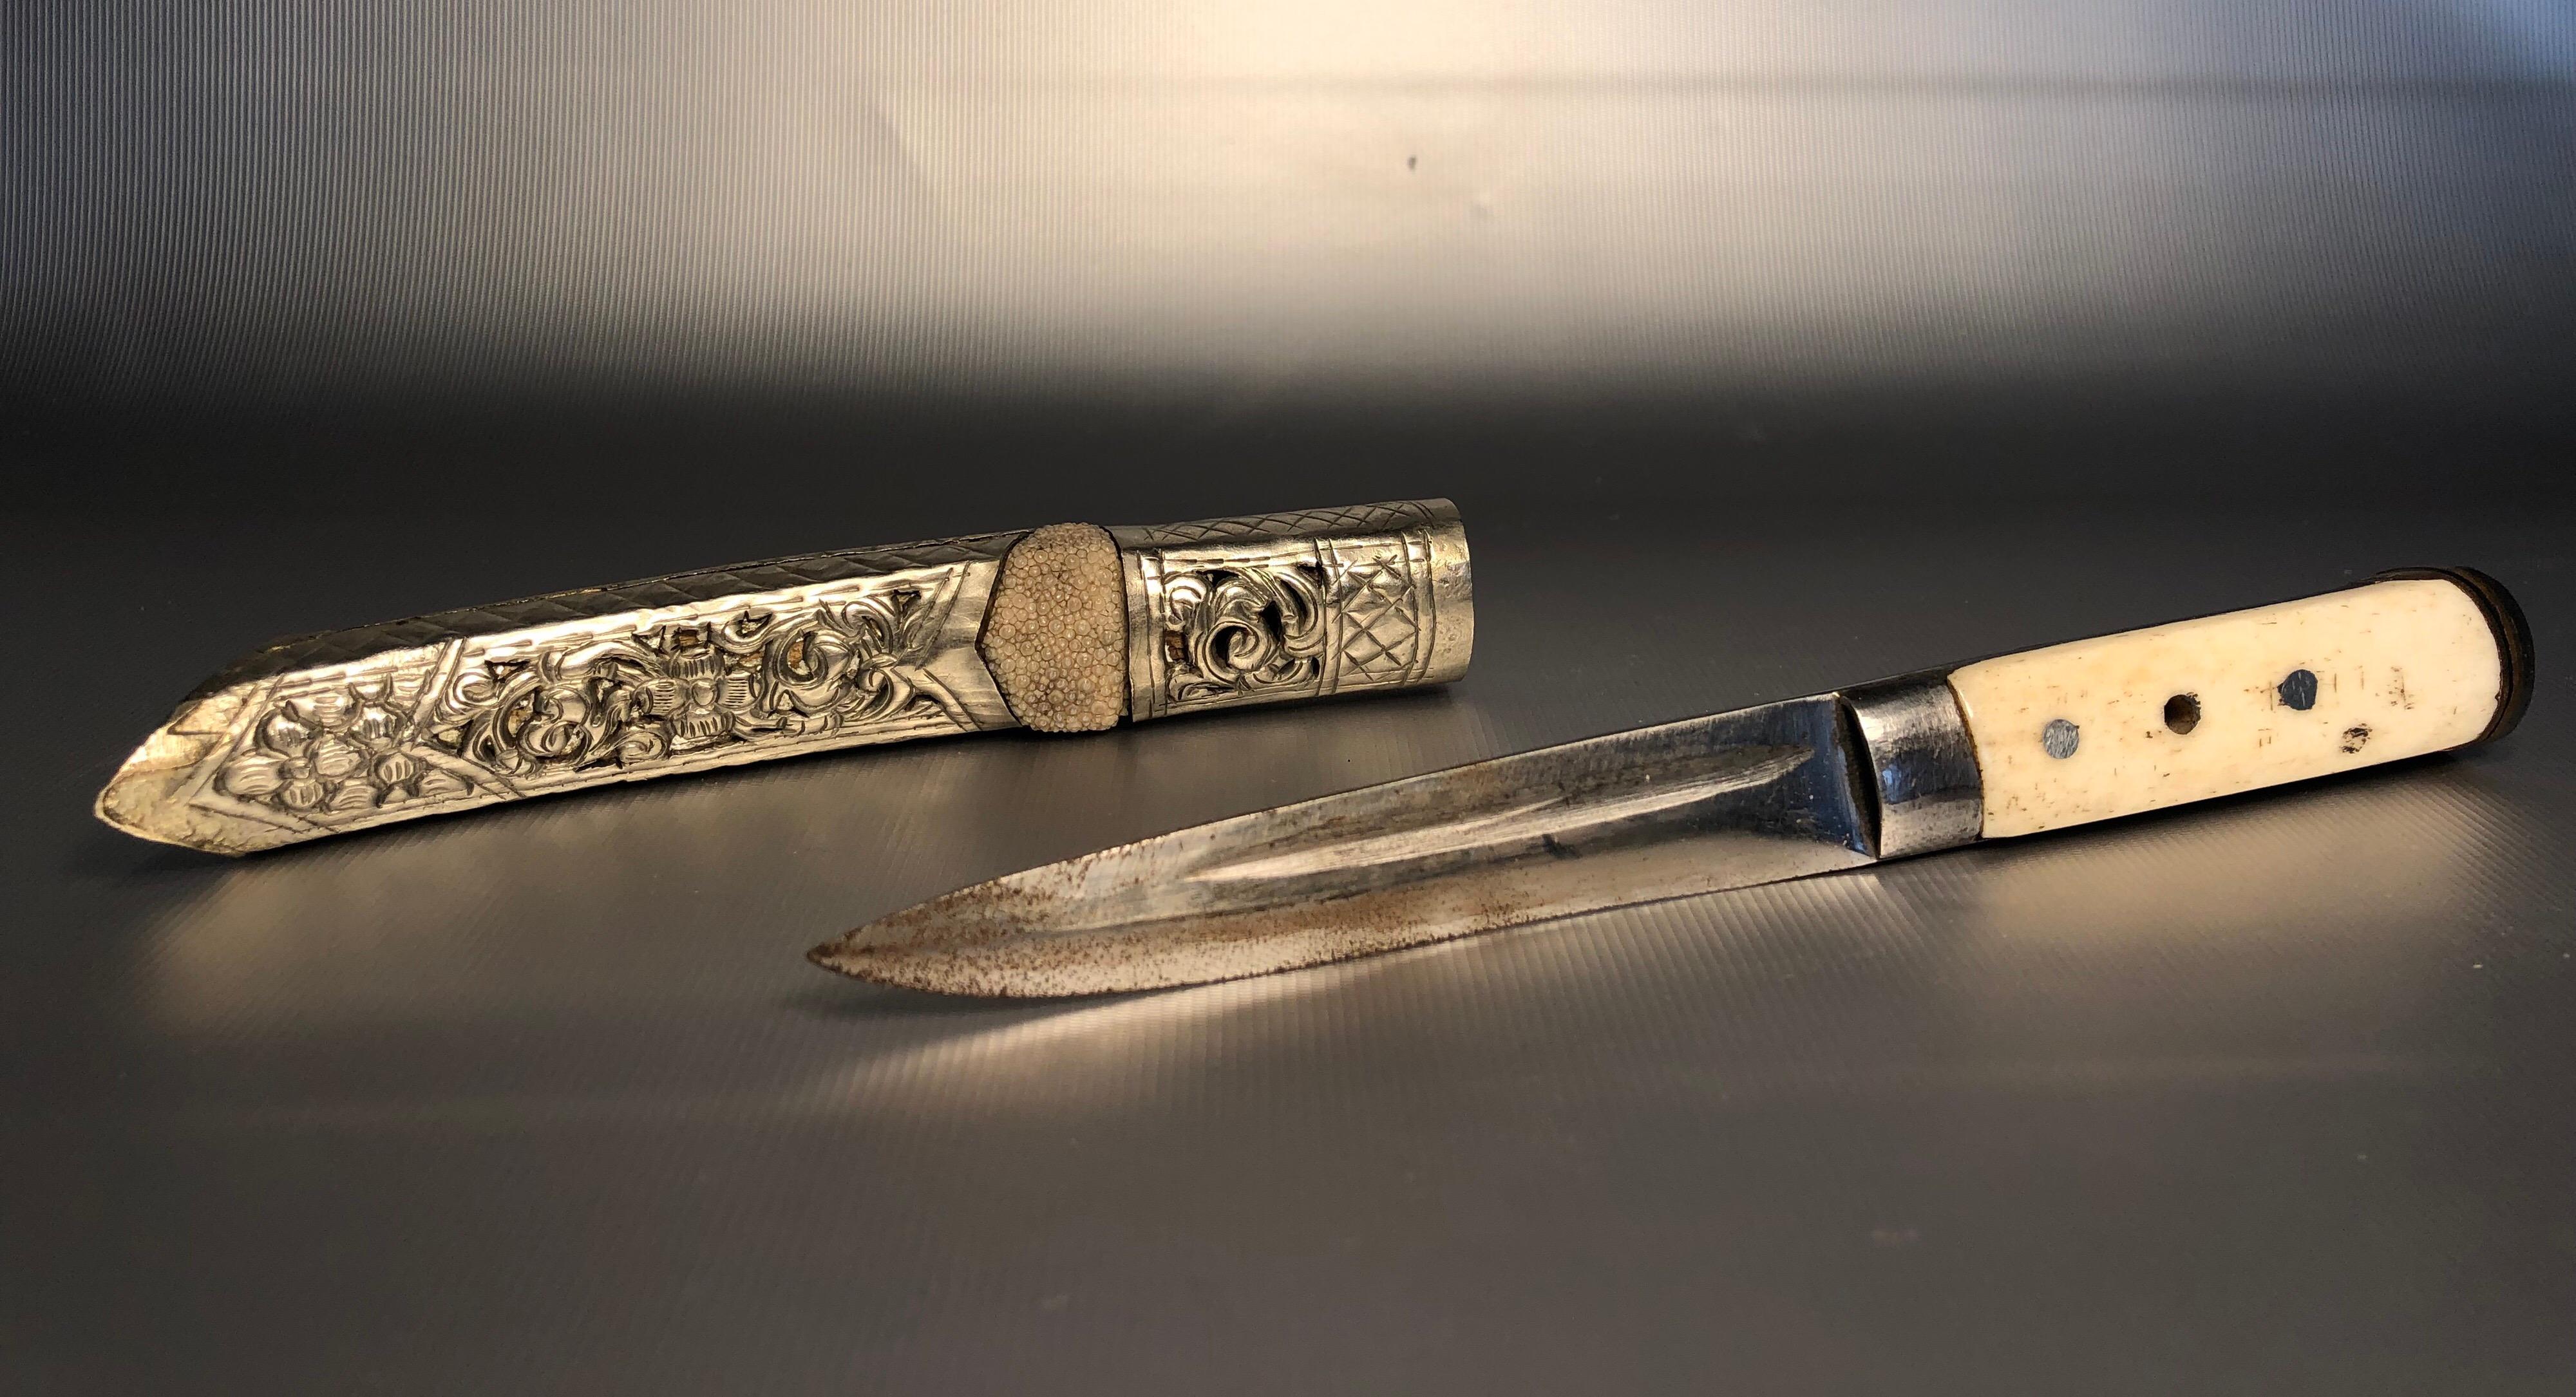 Tibetan dagger. Blade and bone grip. Silver ornate scabbard over 100 years old.